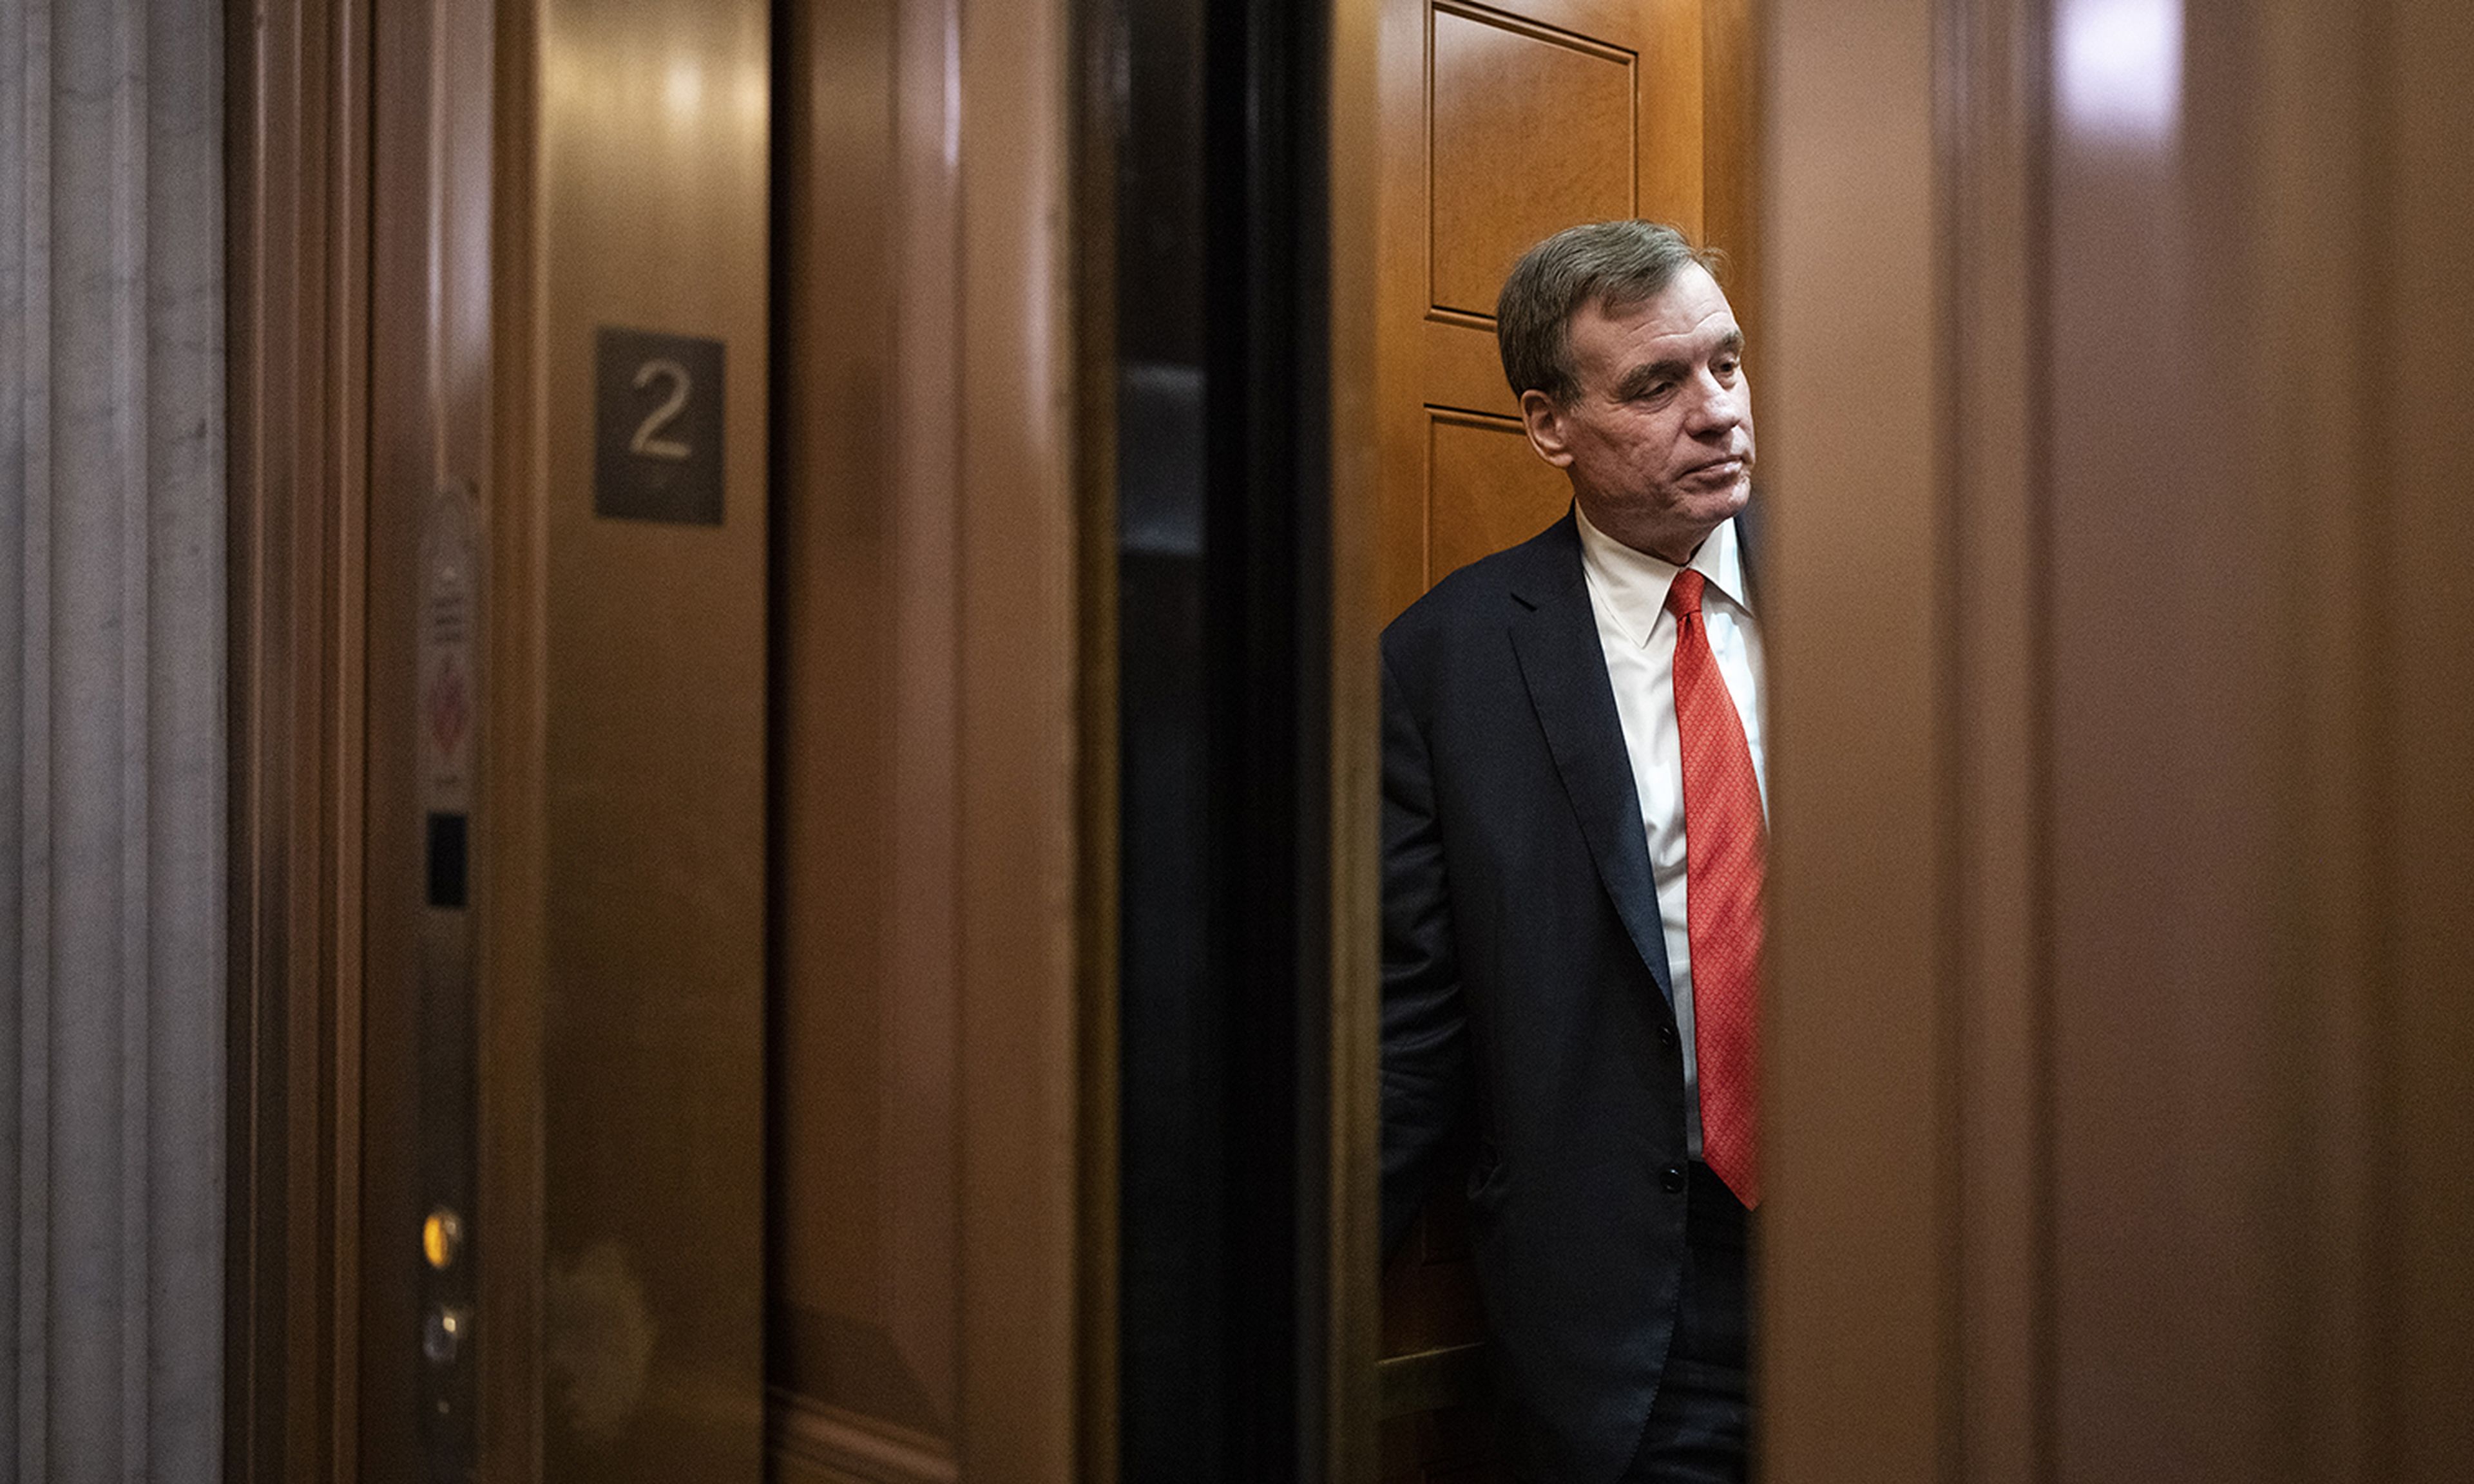 Sen. Mark Warner, D-Va., gets into an elevator outside the Senate Chamber at the U.S. Capitol on April 7, 2022, in Washington. (Photo by Drew Angerer/Getty Images)